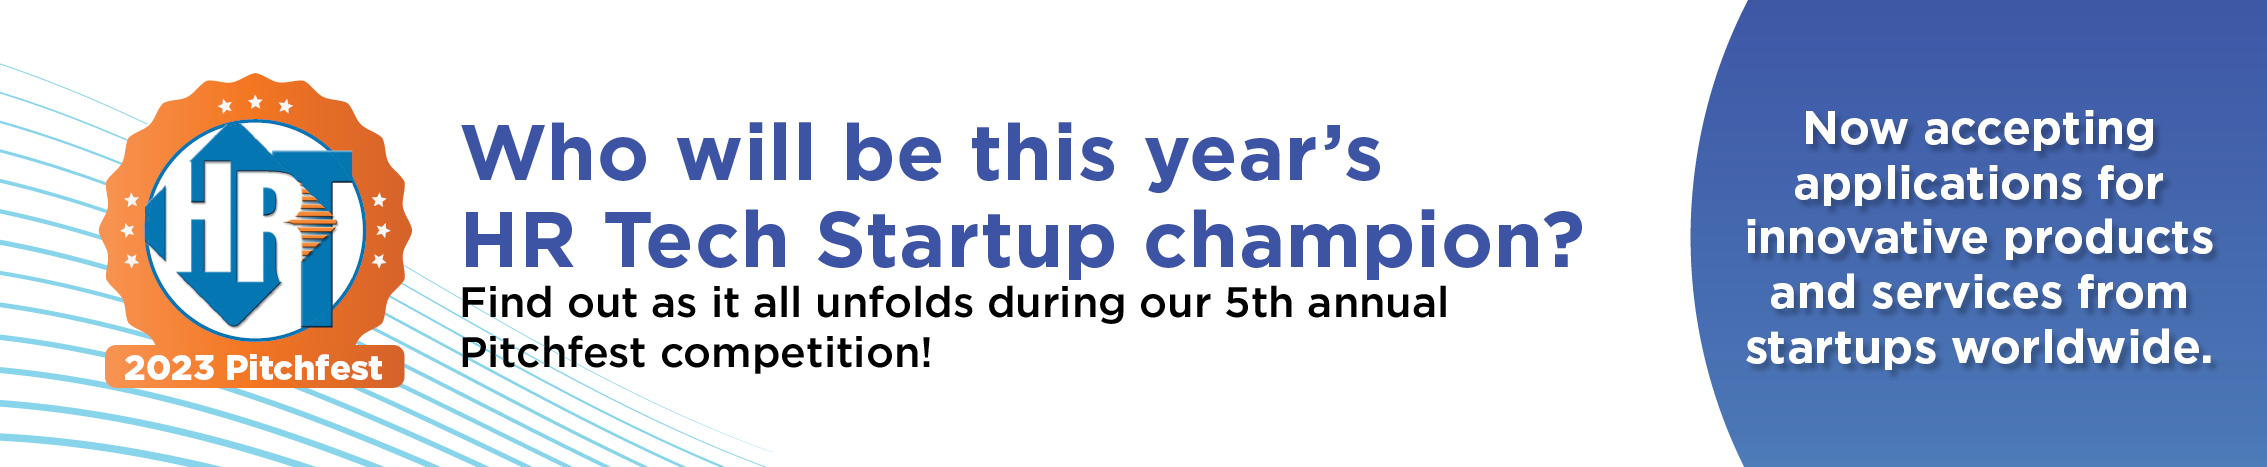 Who will be this year's HR Tech Startup champion?